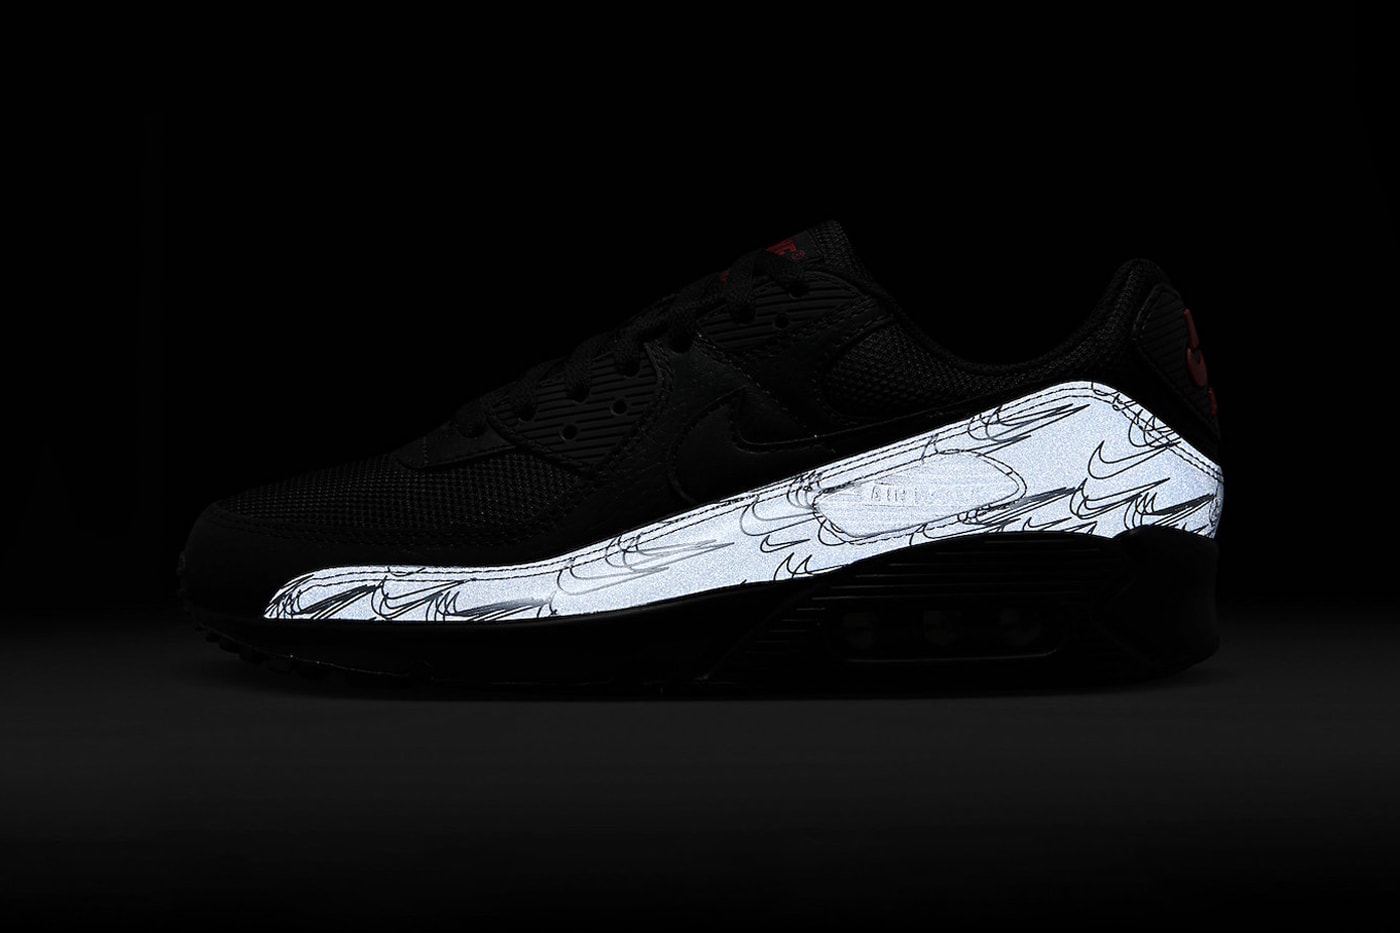 Nike Air Max 90 "Black Reflective" Has Arrived DZ4504-003 release info swoosh stealthy all black sneaker